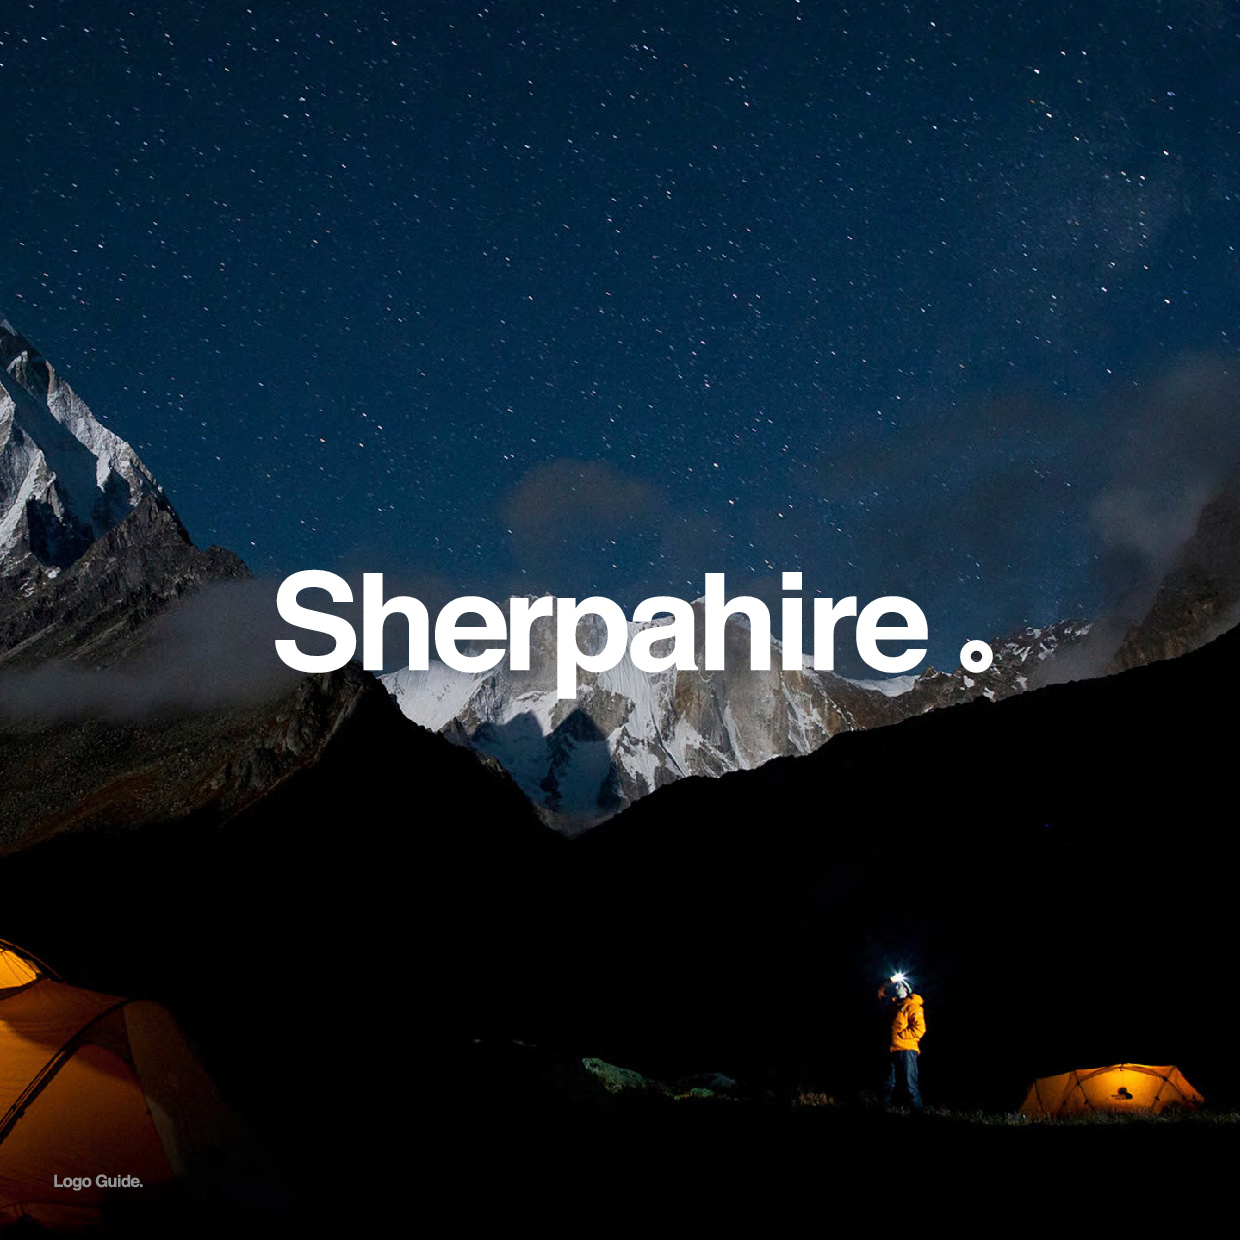 Sherpahire Branding and Logo by M2H agency - Creative Work